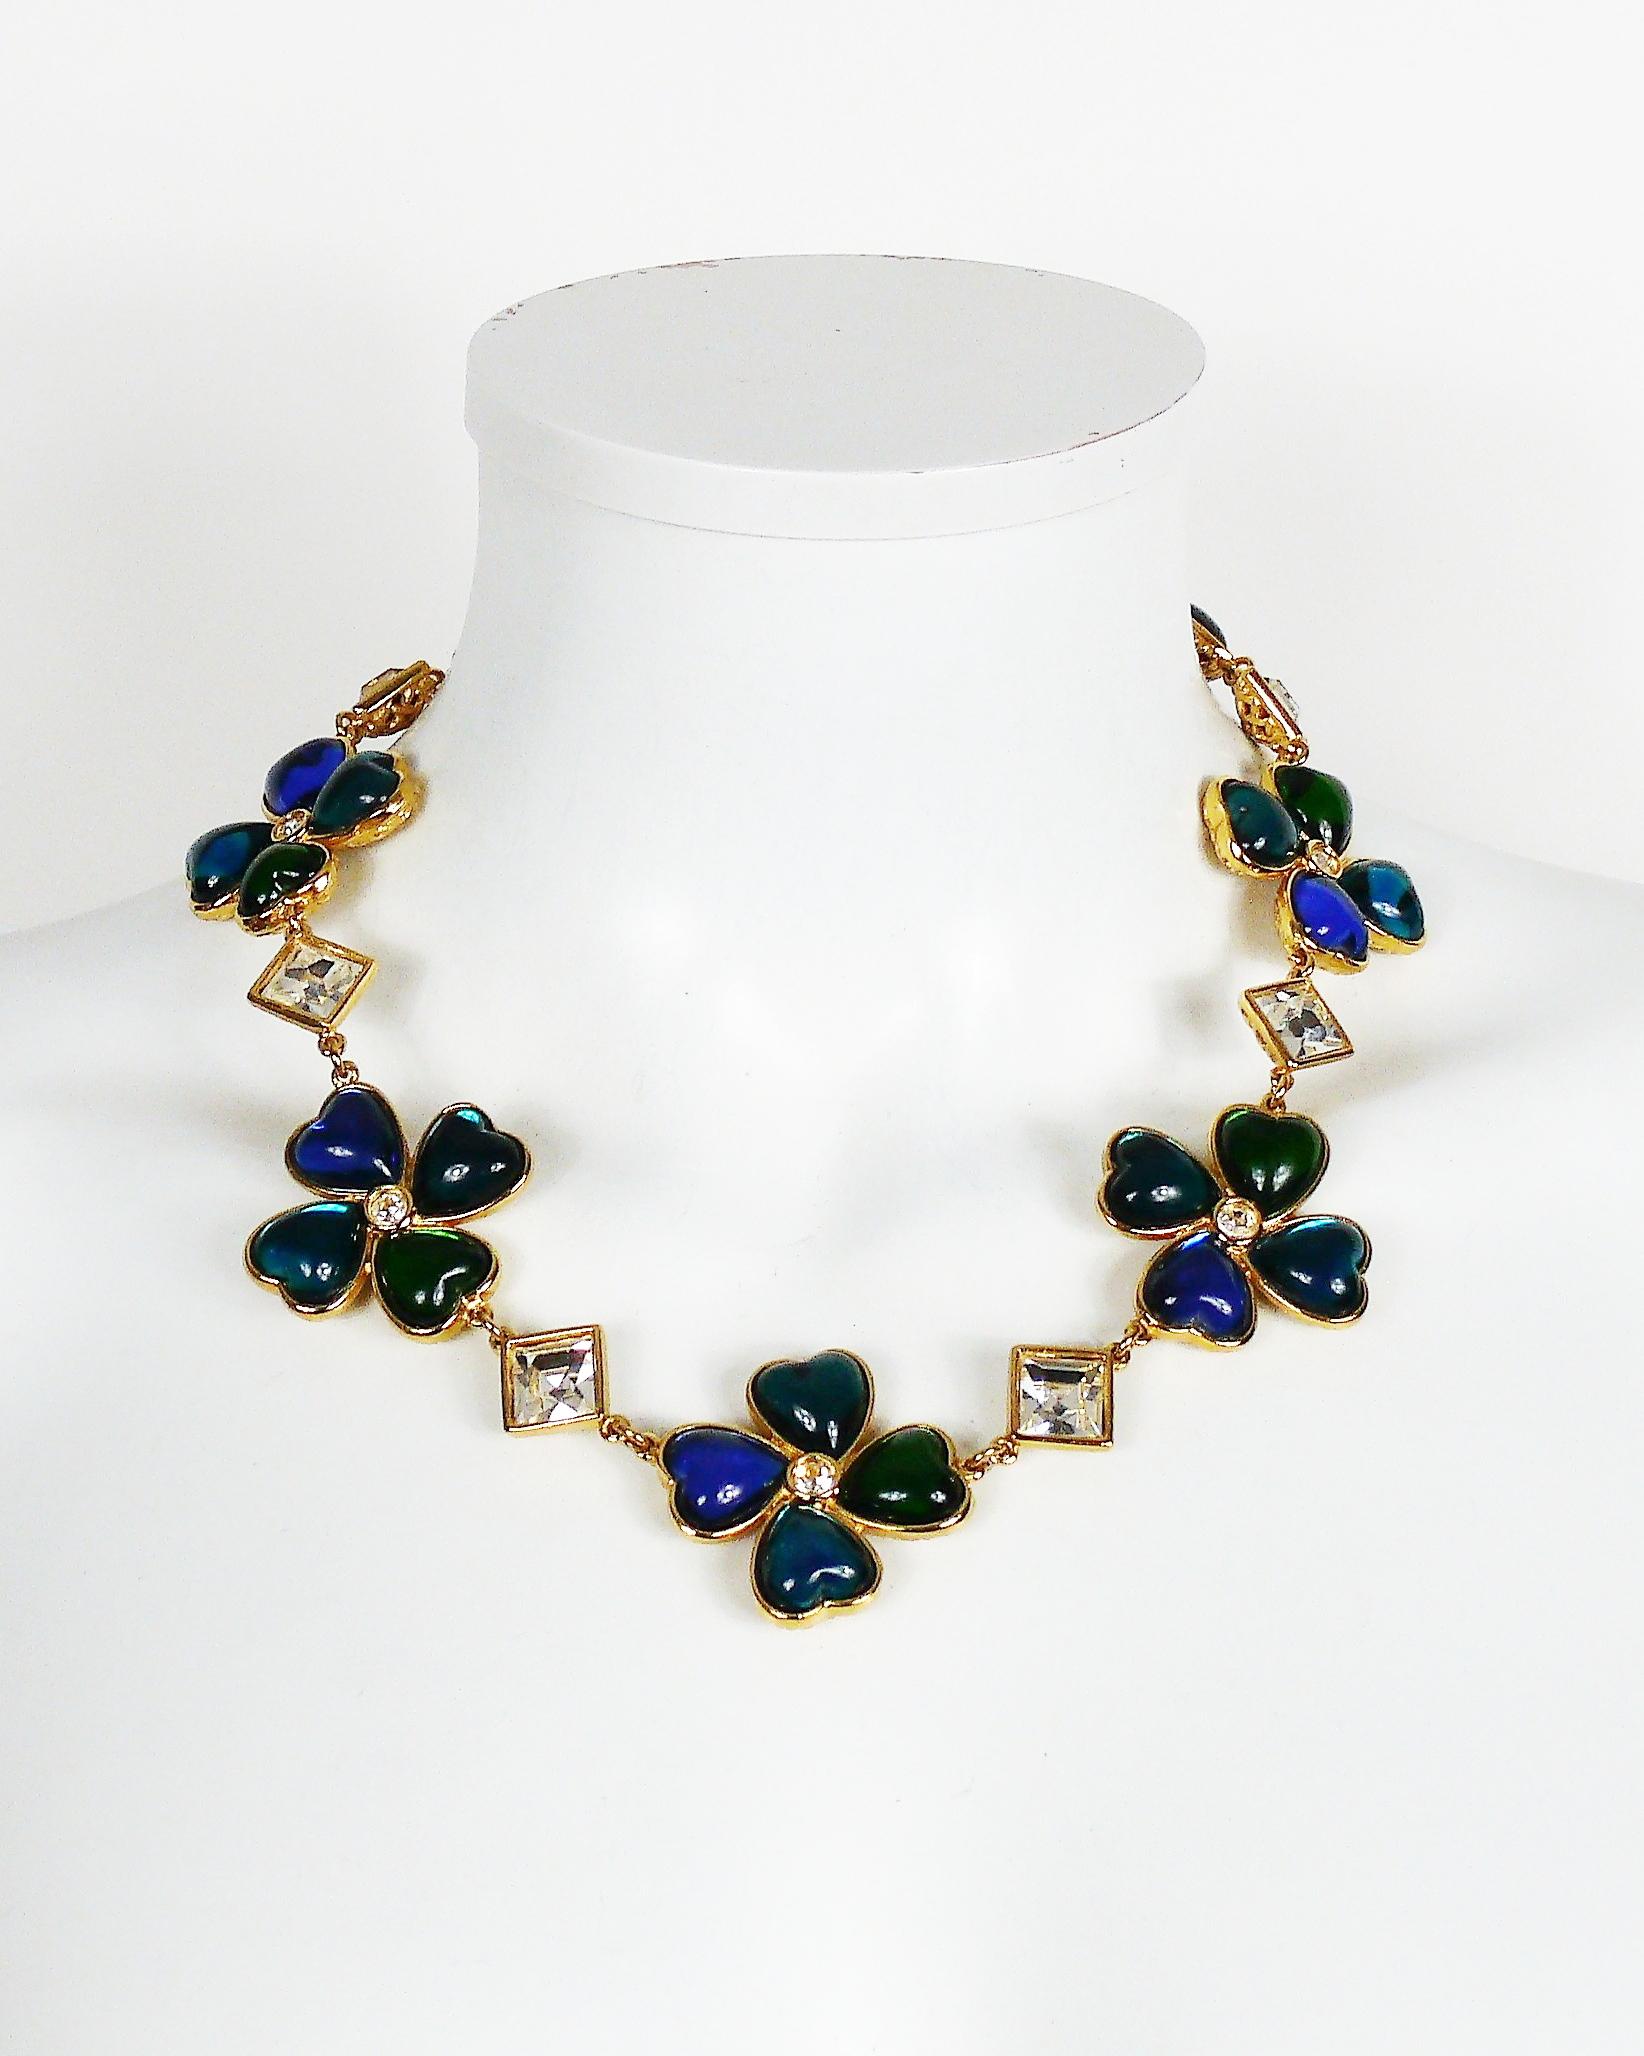 YVES SAINT LAURENT vintage rare gold toned necklace featuring green-blue resin clovers and hearts with clear crystal embellishement.

Gorgeous gold toned filigree work on the reverse (can be worn on this side - as shown on photo 9).

Love clasp and